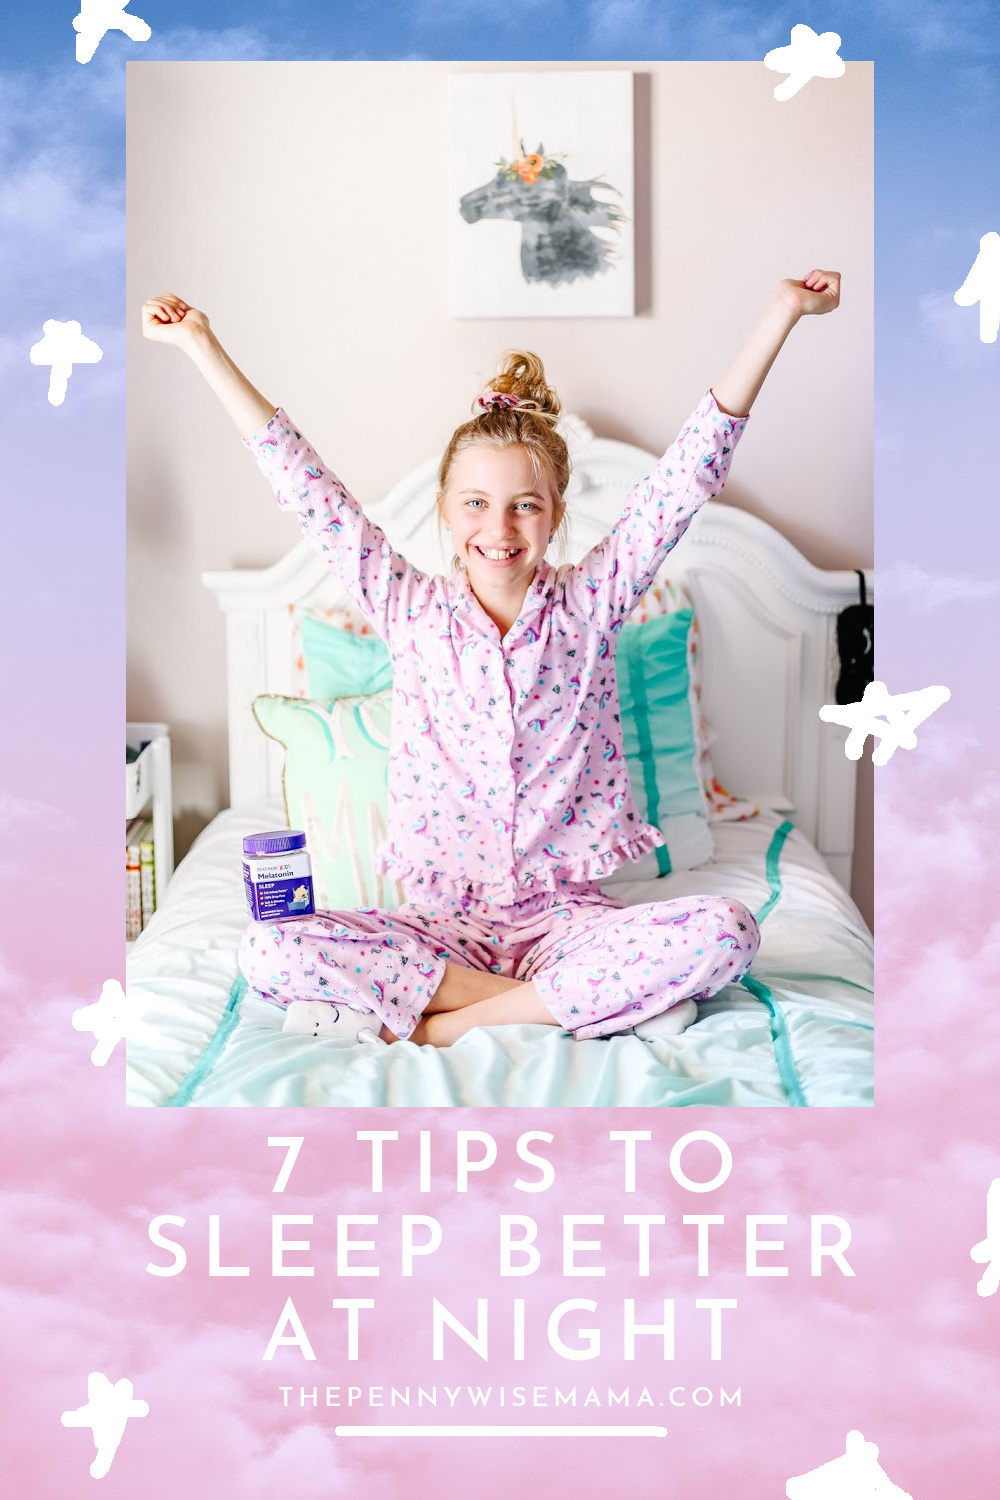 Struggling with not getting good sleep? It’s time to #ResetYourSnooze! Sleep better at night with these helpful tips featuring @NatrolOfficial Melatonin! @walmart #Natrol #NatrolNights